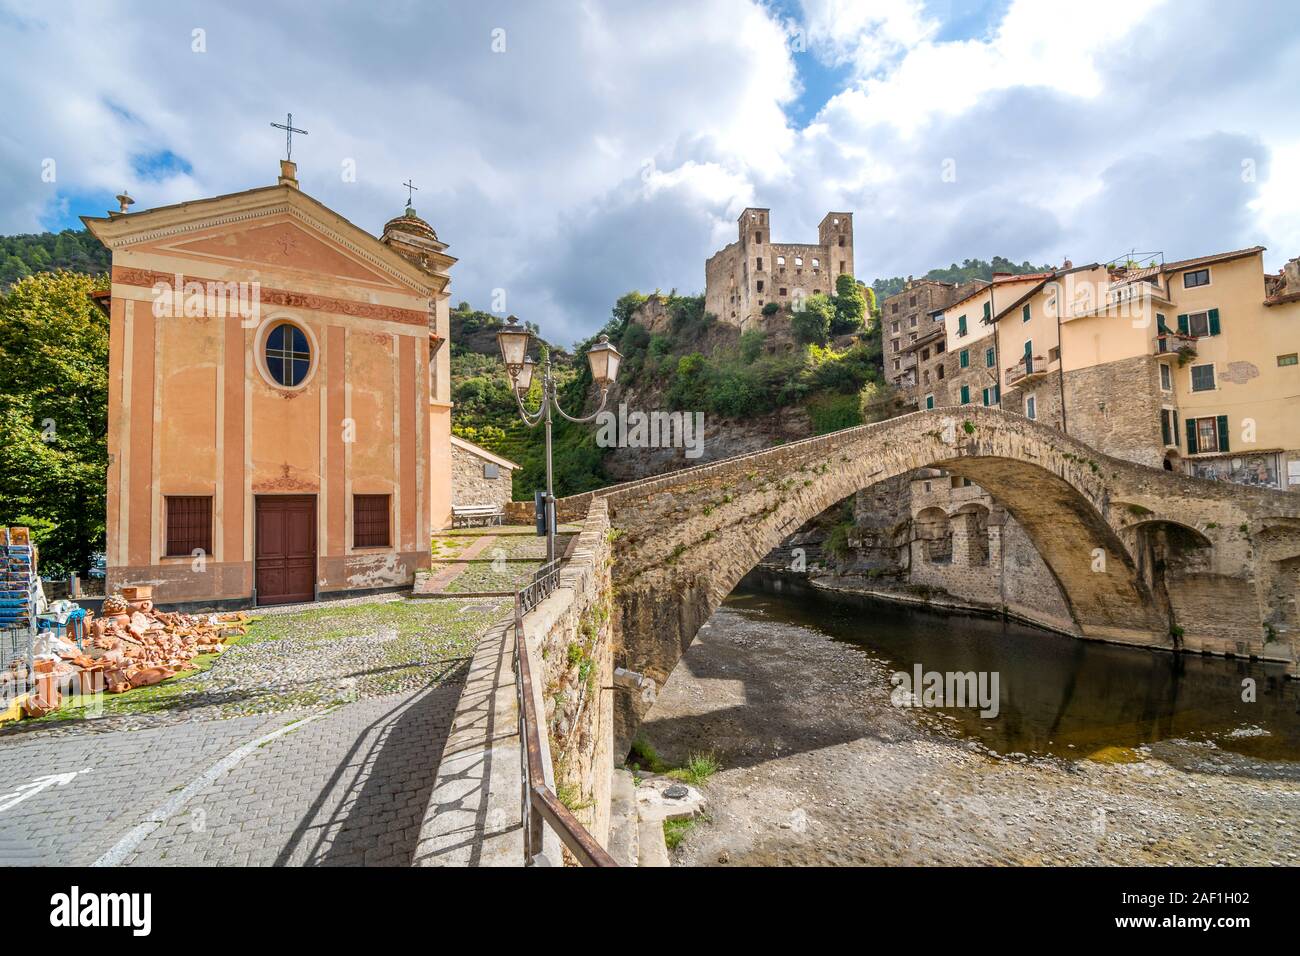 The famous, medieval Monet bridge with the Church of San Filippo next to it in the historic ancient hilltop city of Dolceacqua, Italy. Stock Photo